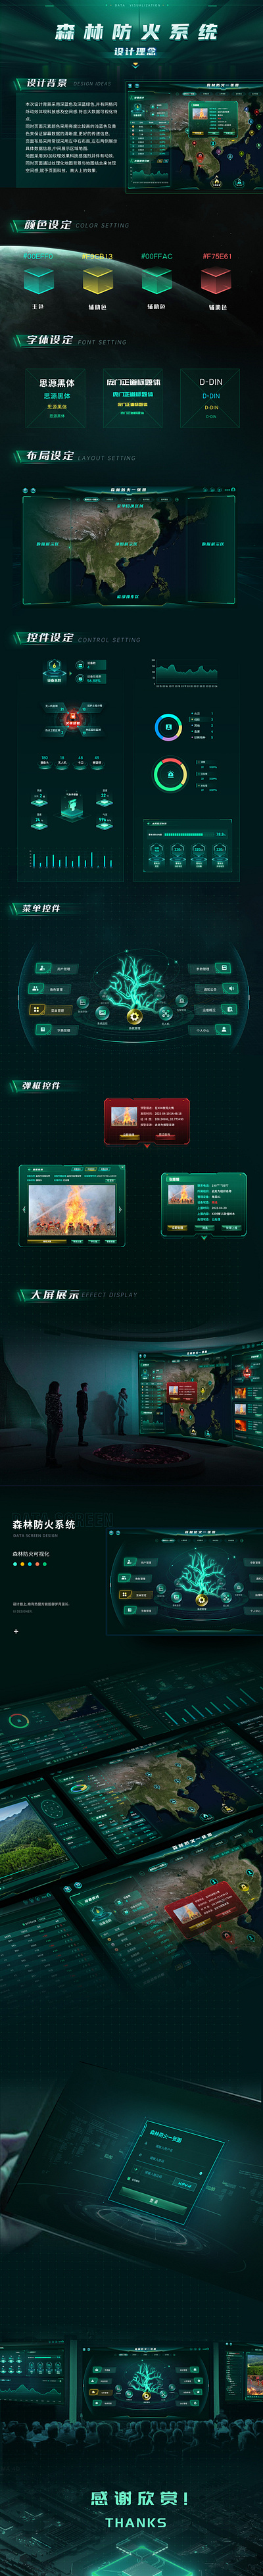 Interface Design of Forest Fire Protection System ui fui